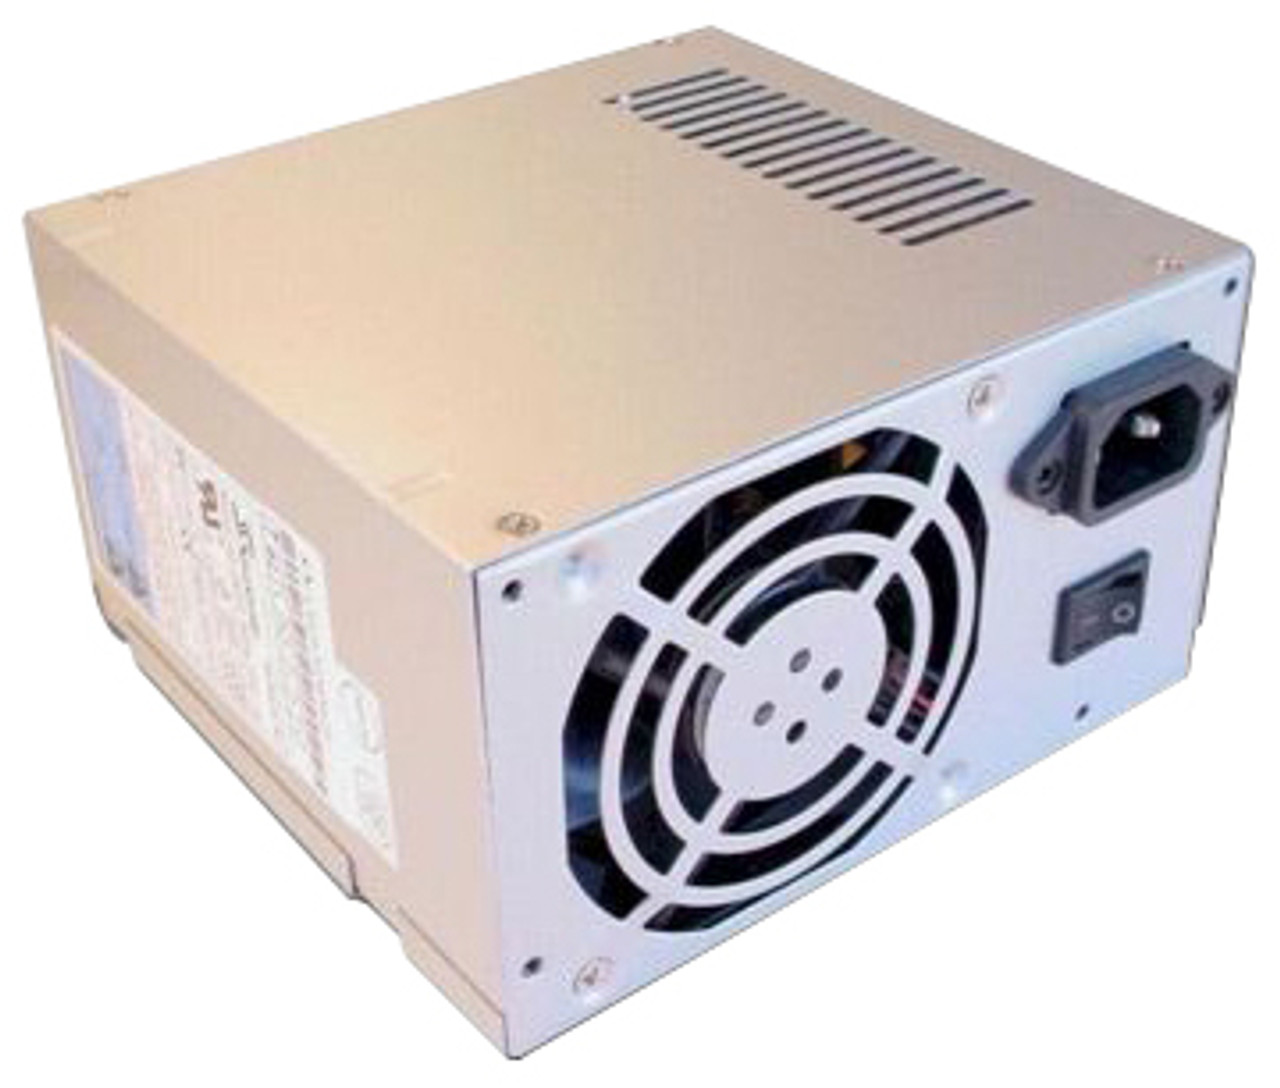 PY.50008.001 Acer 500 Watts Power Supply for Aspire M7200